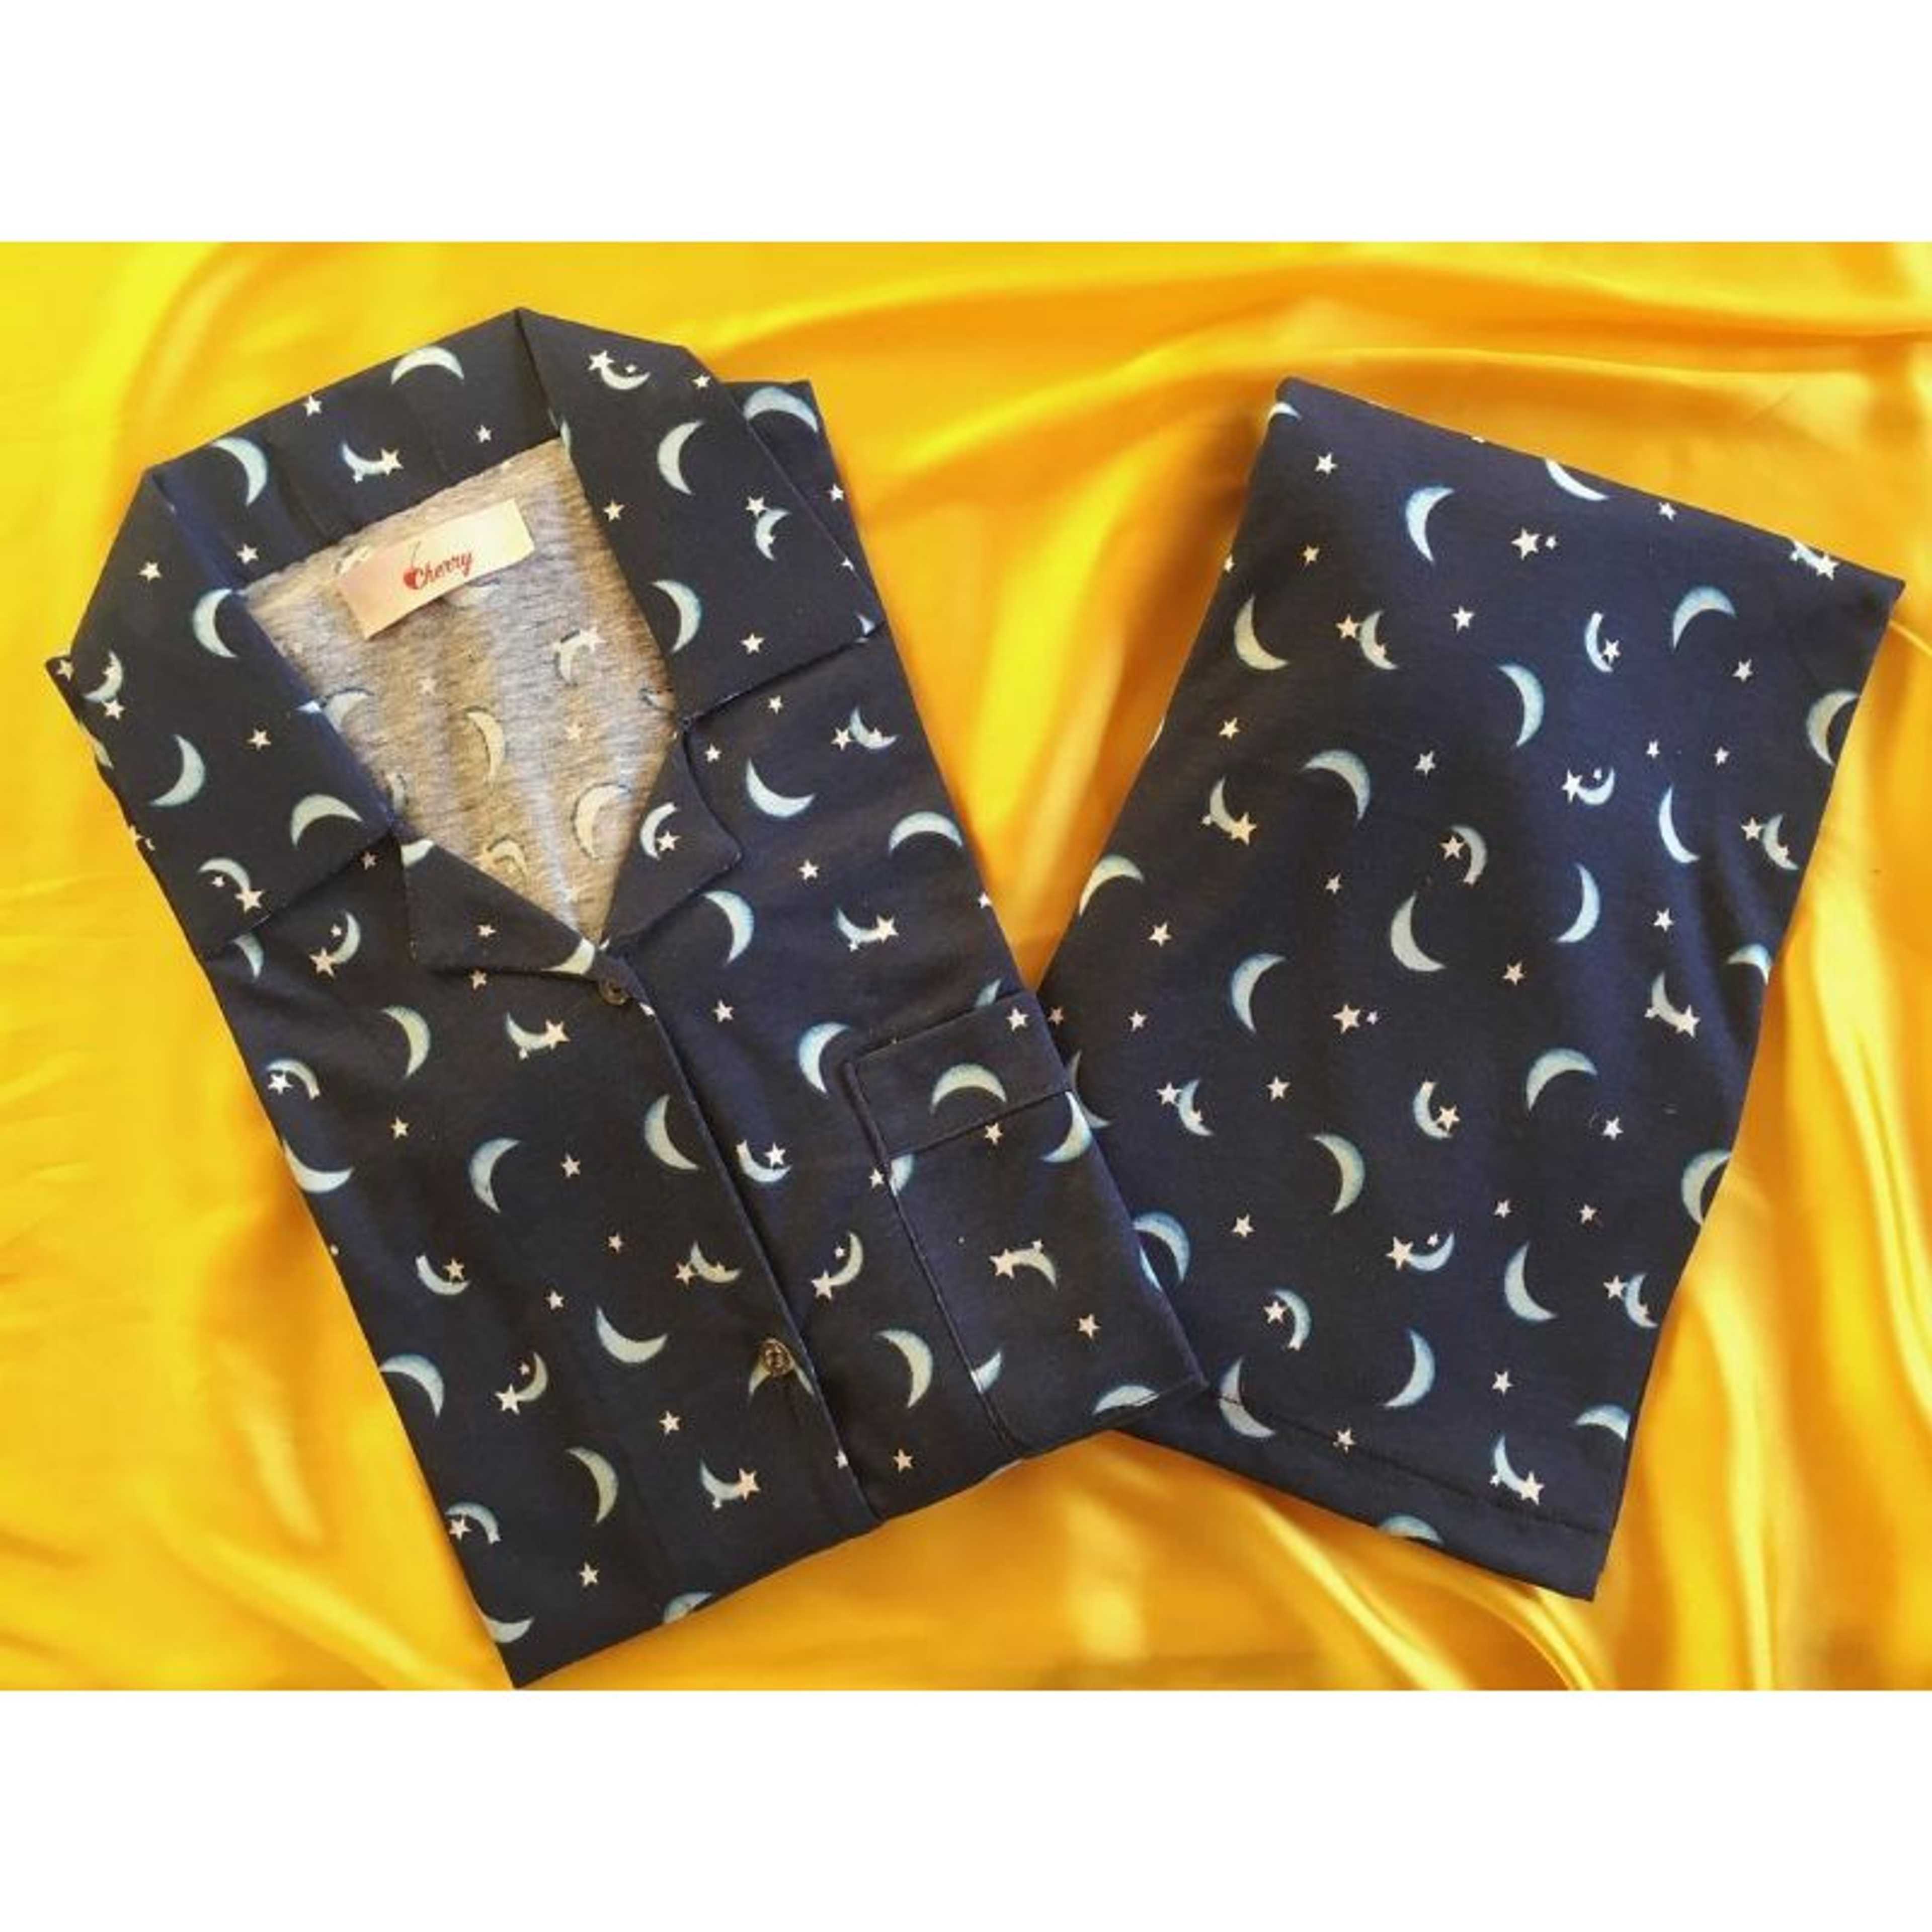  Starry night  Collared shirt and pjs 